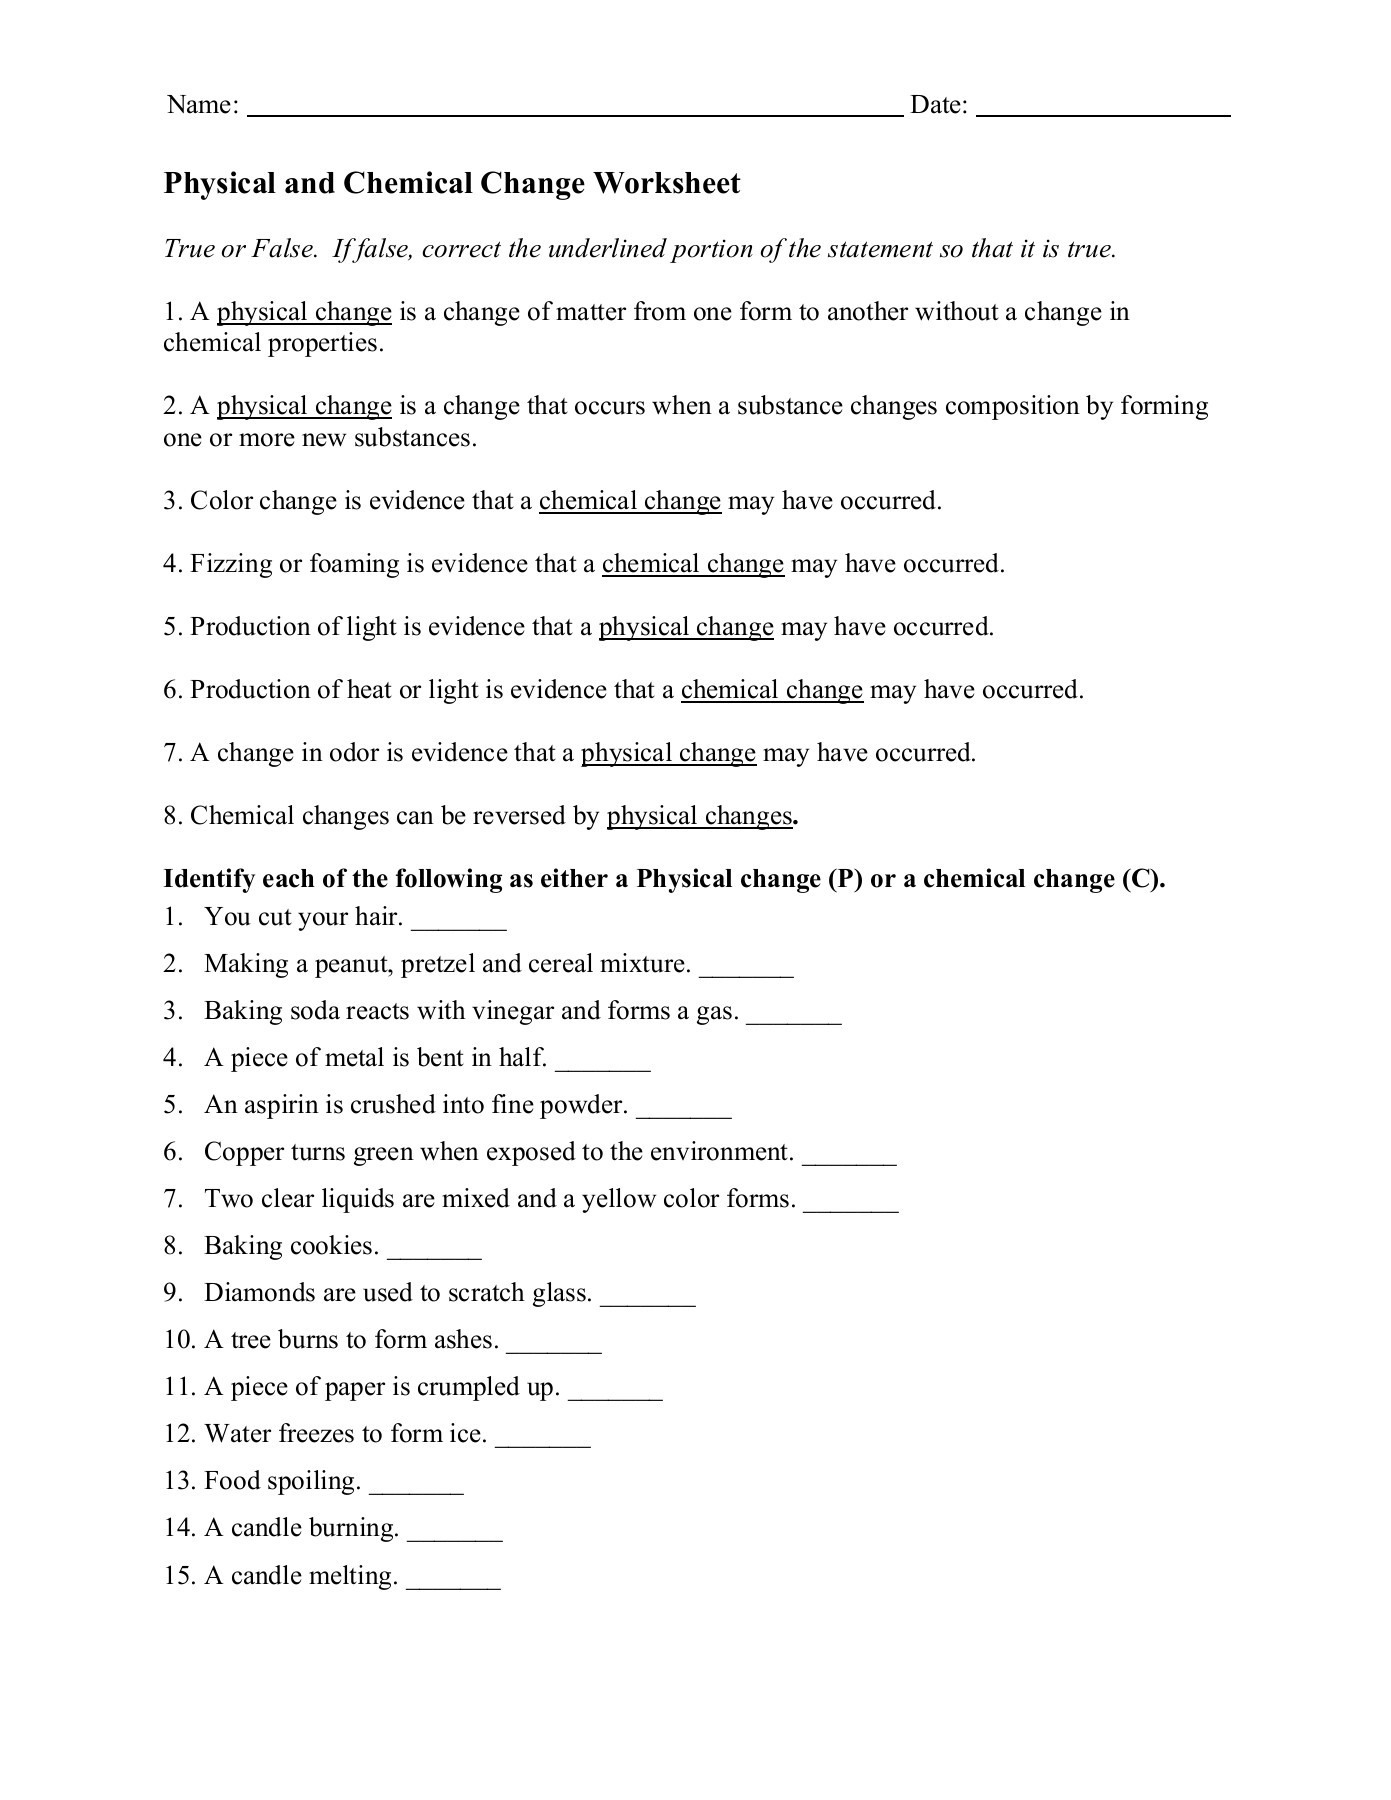 Accelerated Reader Physical And Chemical Change Worksheet Free Printables